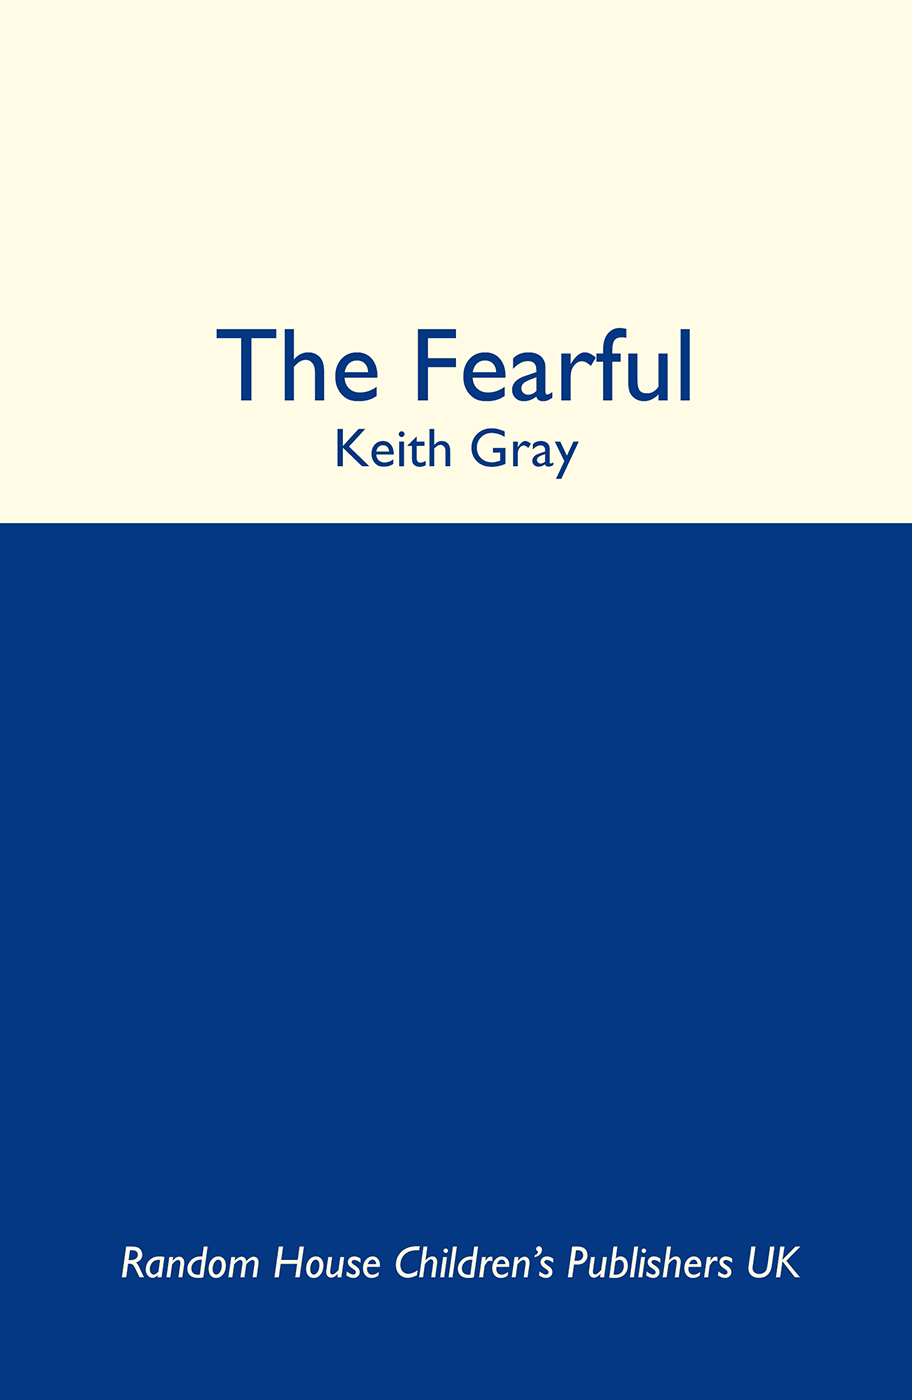 The Fearful (2006) by Keith Gray